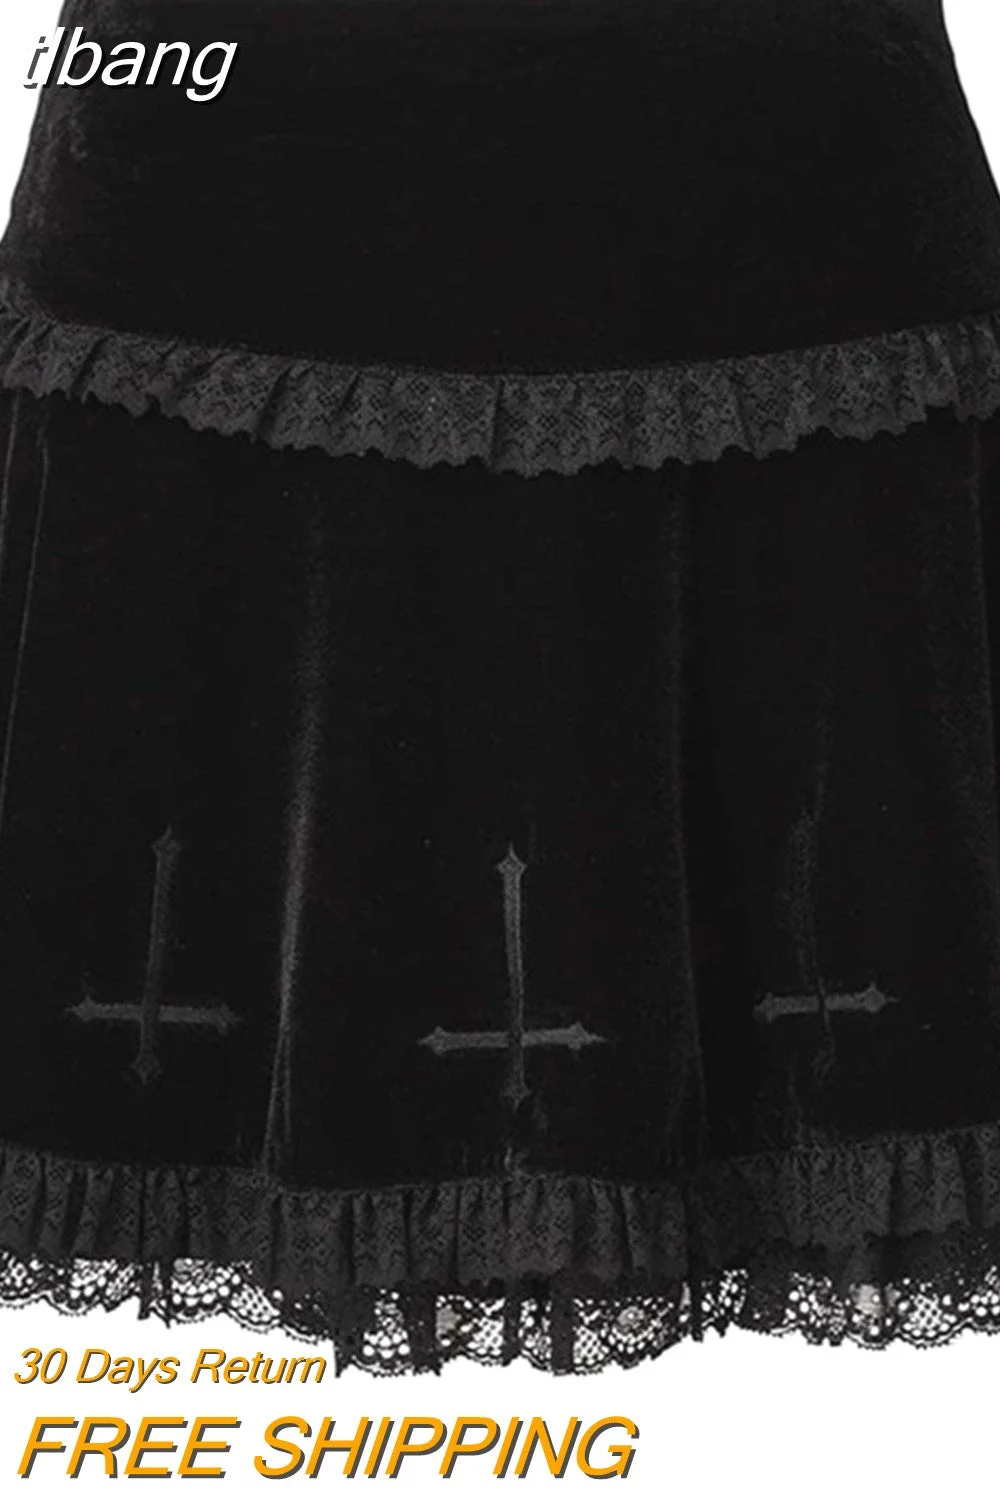 tlbang Punk Cross Pattern Mini Skirt Y2K Grunge Gothic Black Lace High Waist Pleated A-line Skirt Vintage Women E-girl Clothes